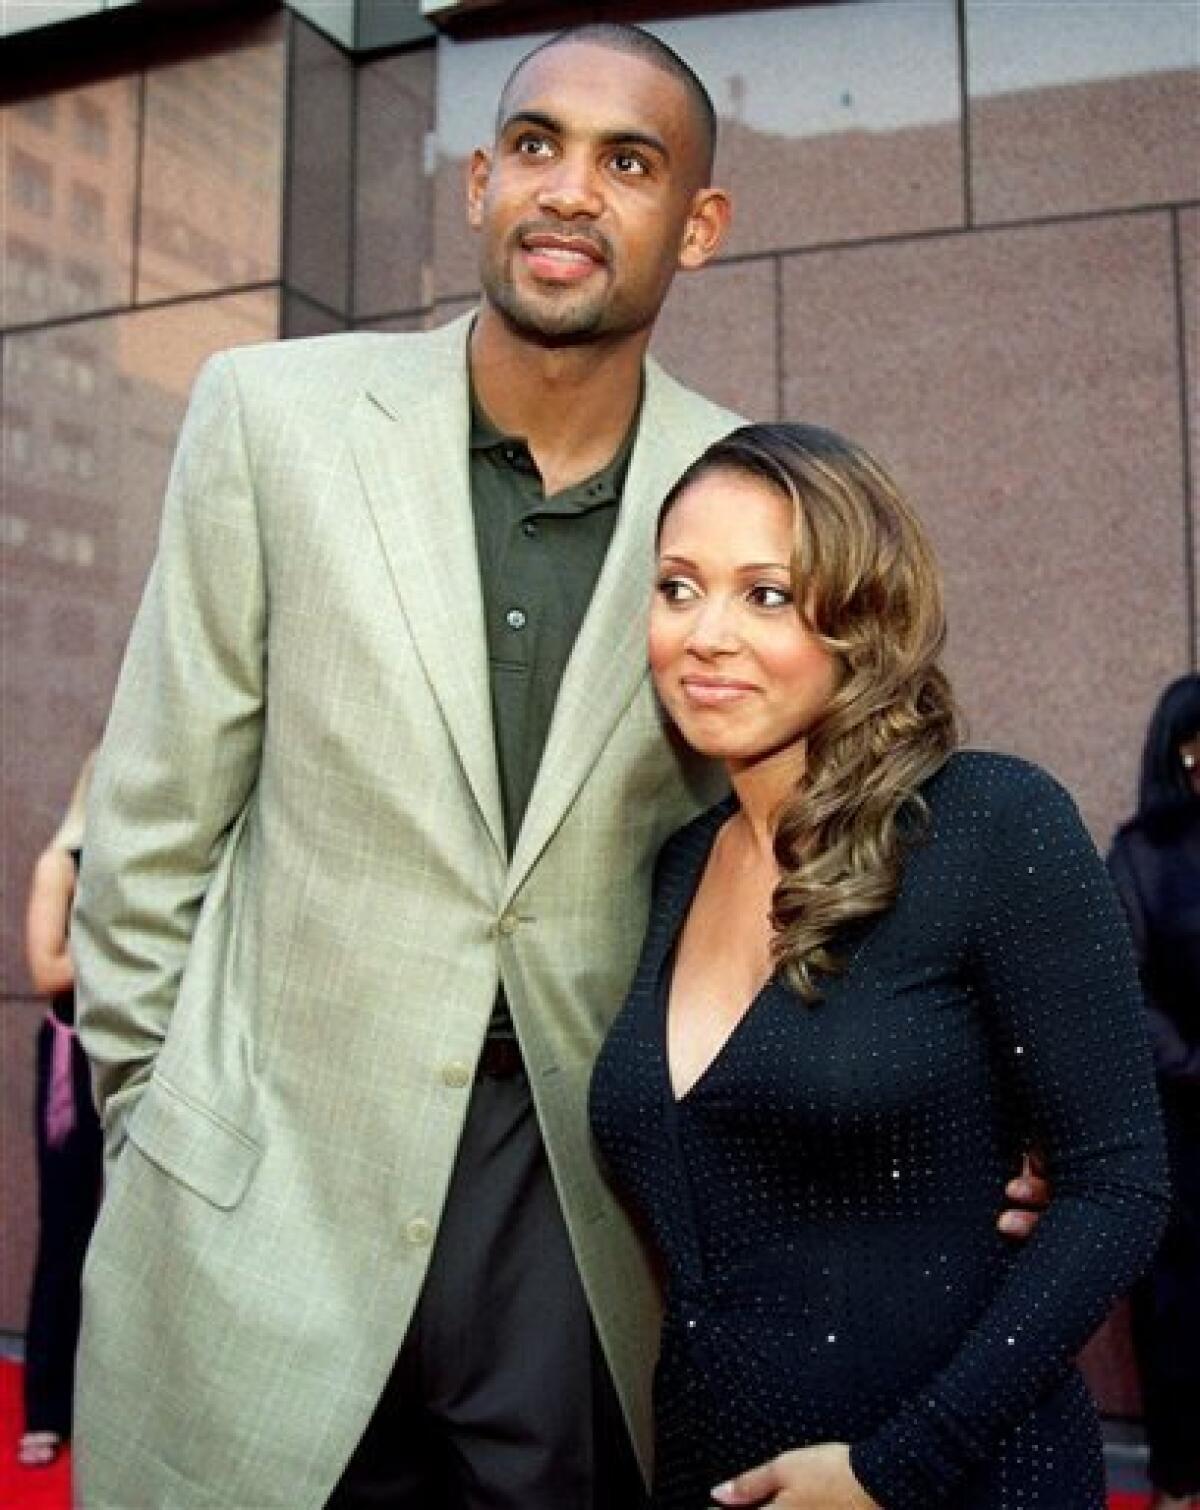 FILE - In a Sept. 7, 2001 file photo singer Tamia, right, and her husband, Grant Hill, then of the Orlando Magic, arrive fat a concert at New York's Madison Square Garden, Friday, Sept. 7, 2001. A week after he retired from the NBA, Grant Hill celebrated with his wife as she performed for a feverish crowd in New York City on Saturday night June 8, 2013. (AP Photo/Tina Fineberg)